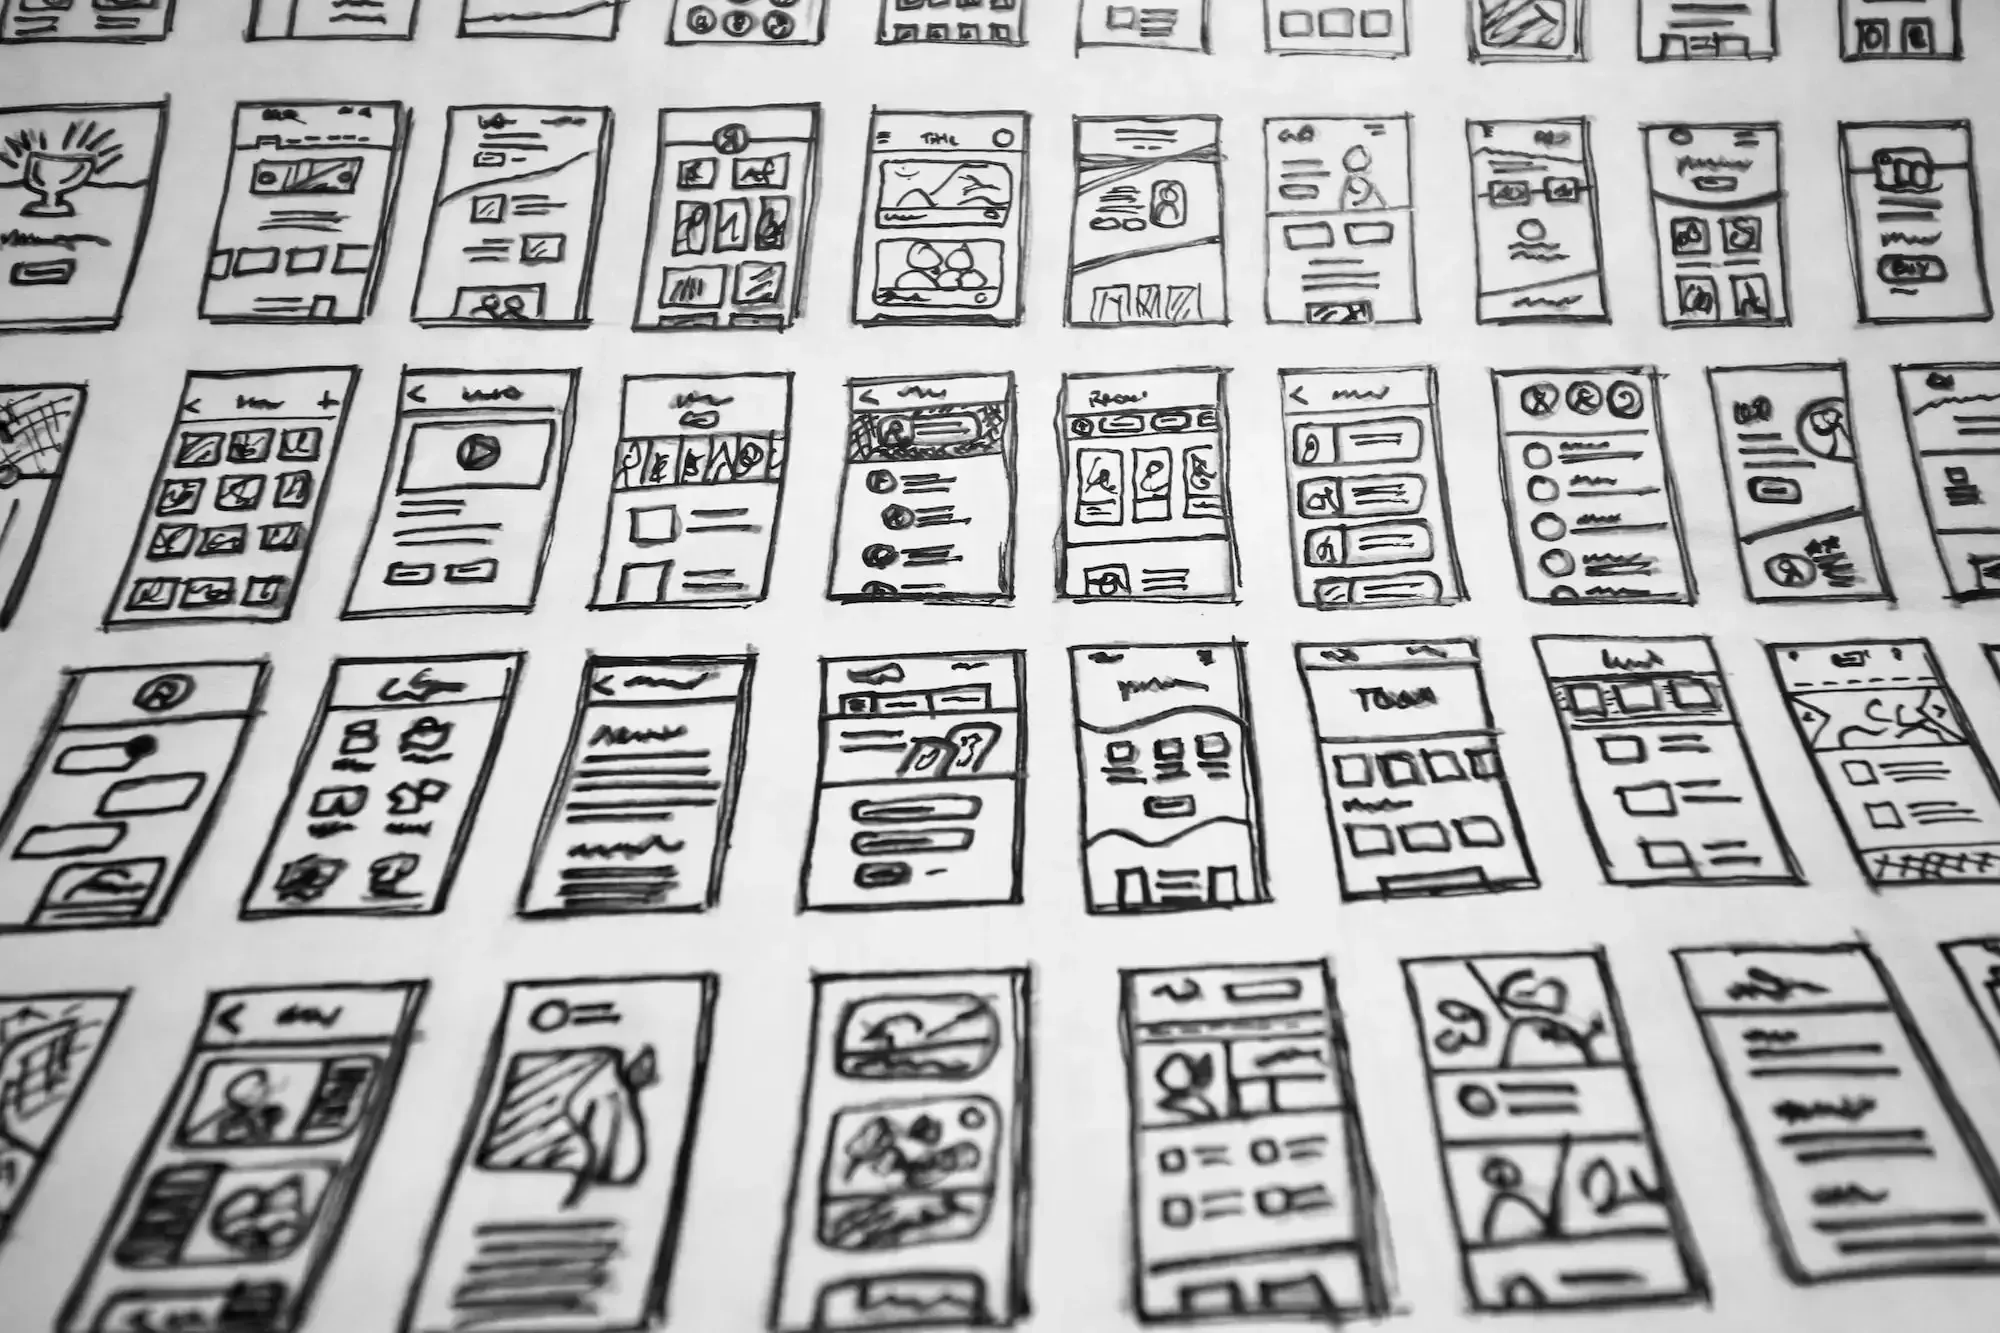 Black and white photo of several sketched screens by hand placed in rows.